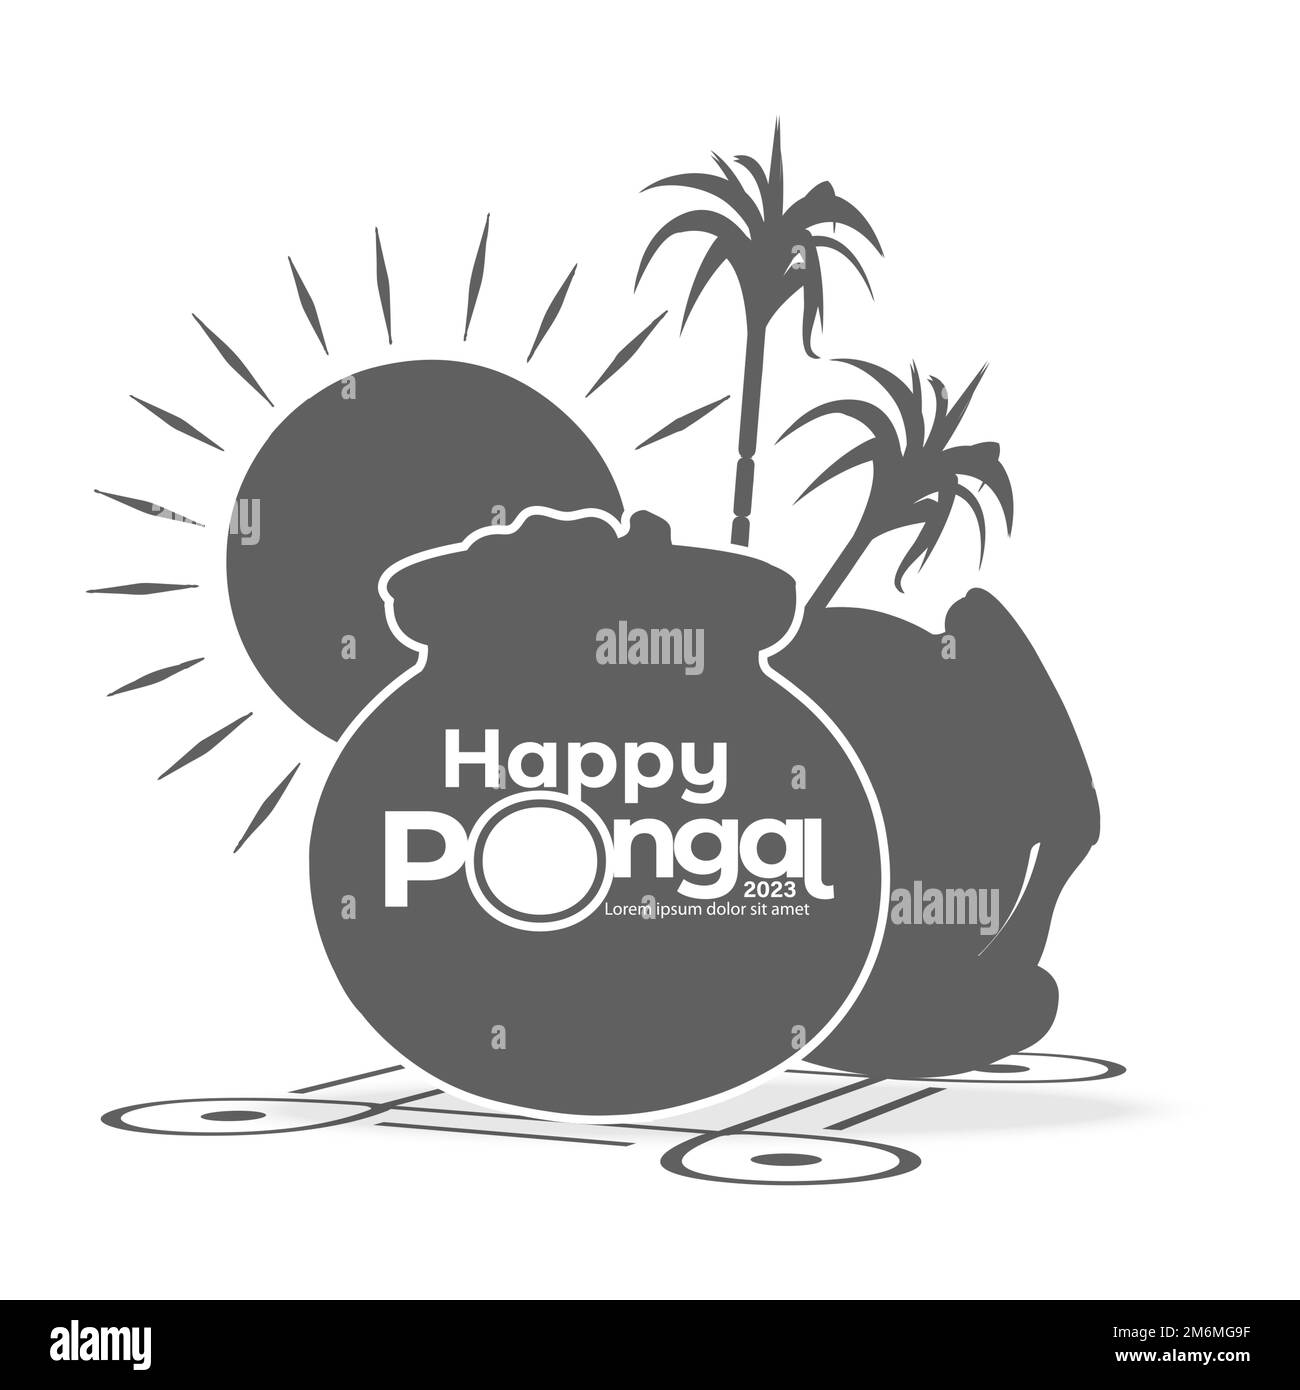 illustration of Happy Pongal Festival of Tamil Nadu South India. can be used for advertisement, offer, banner, poster designs. Stock Vector